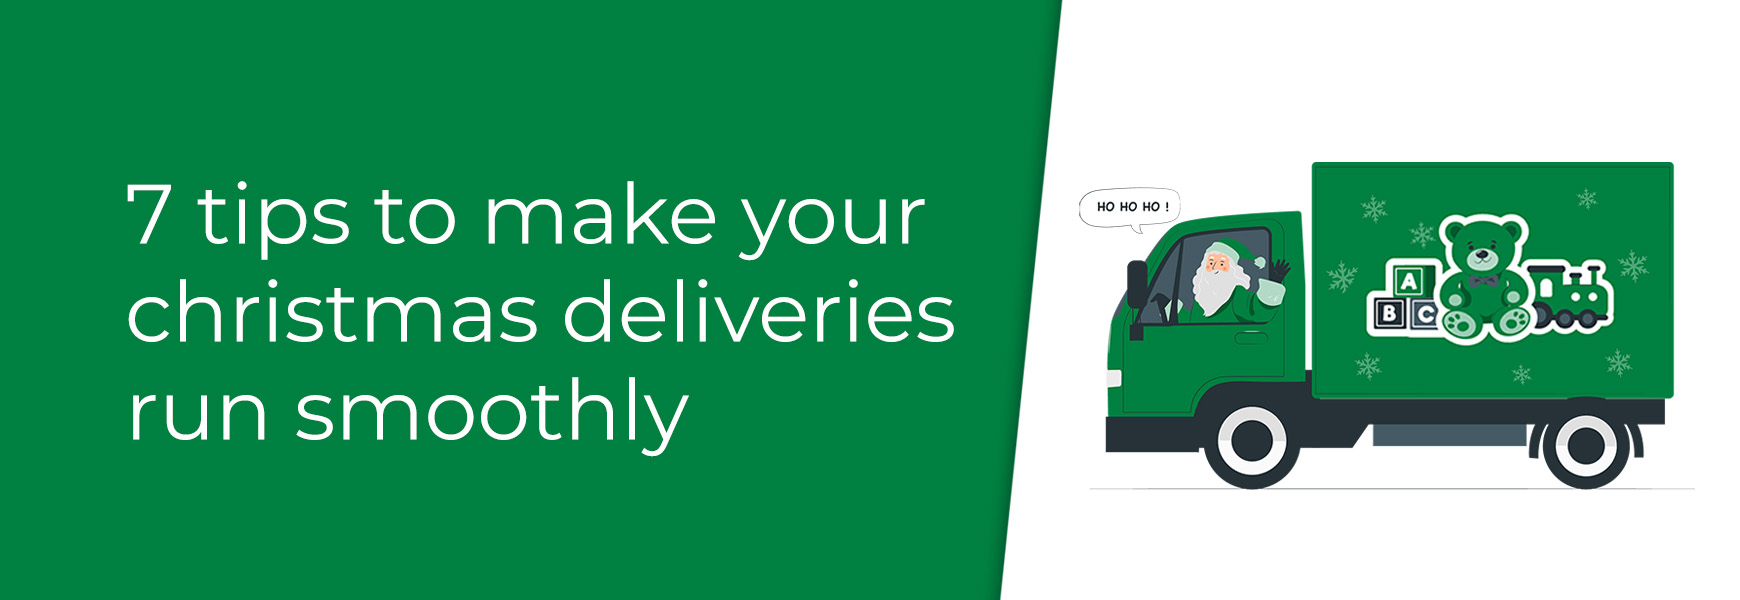 7 tips to make your christmas deliveries run smoothly